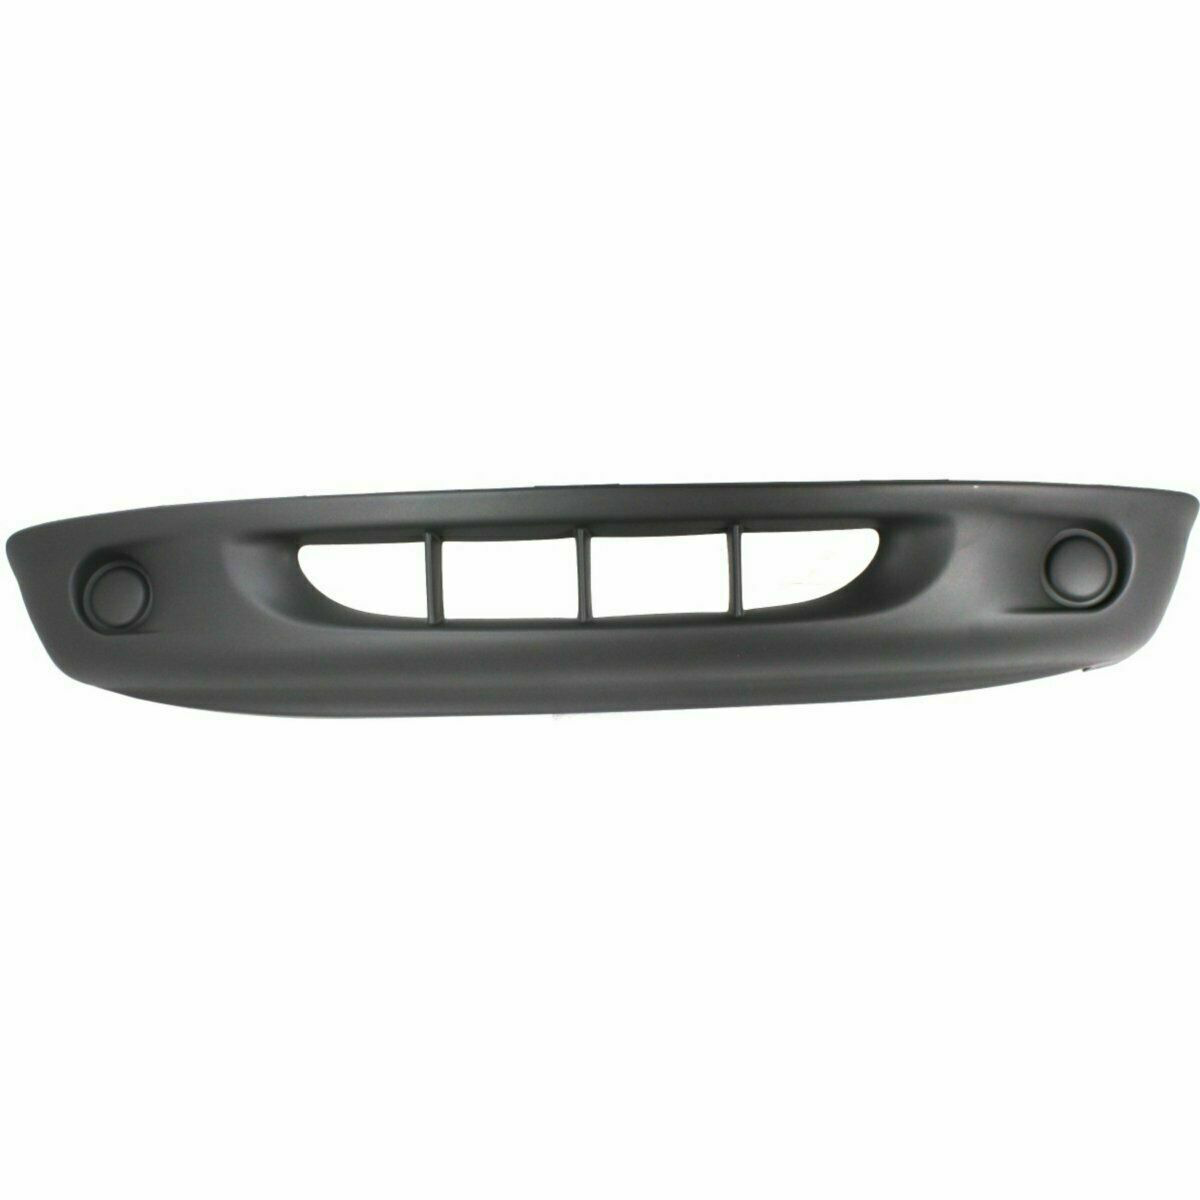 1998-2000 Dodge Durango (No Fog) Lower Front Bumper Painted to Match